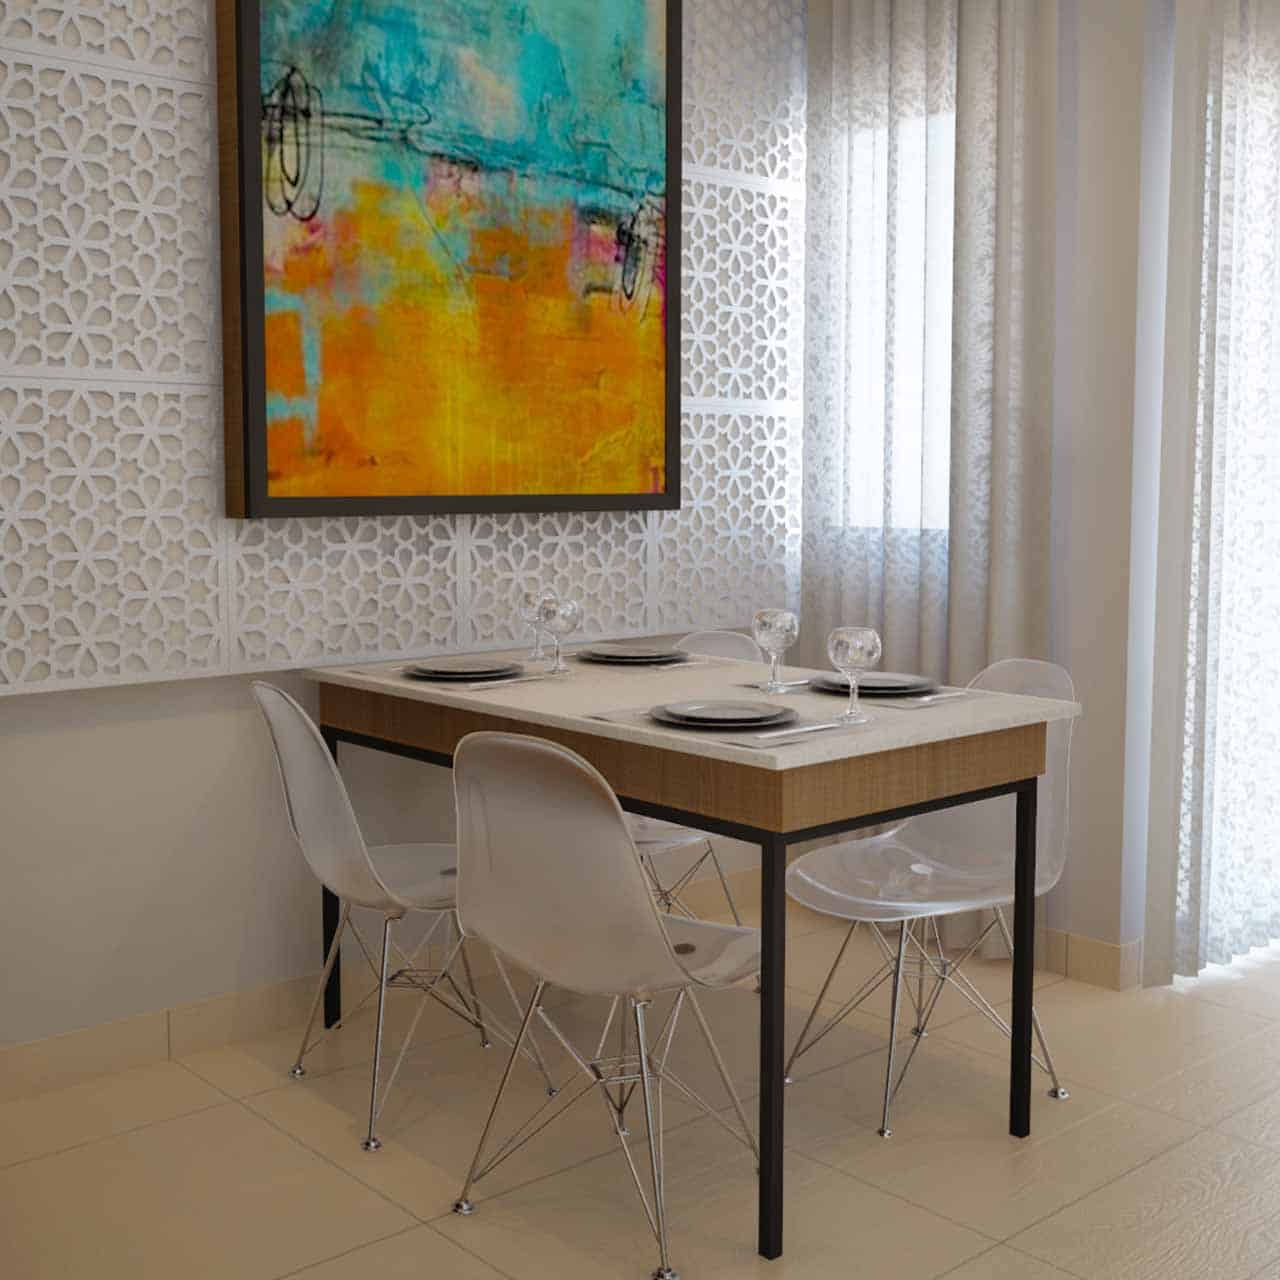 Modern dining table design which makes a minimalistic dining room the perfect place to enjoy a meal in a dining room